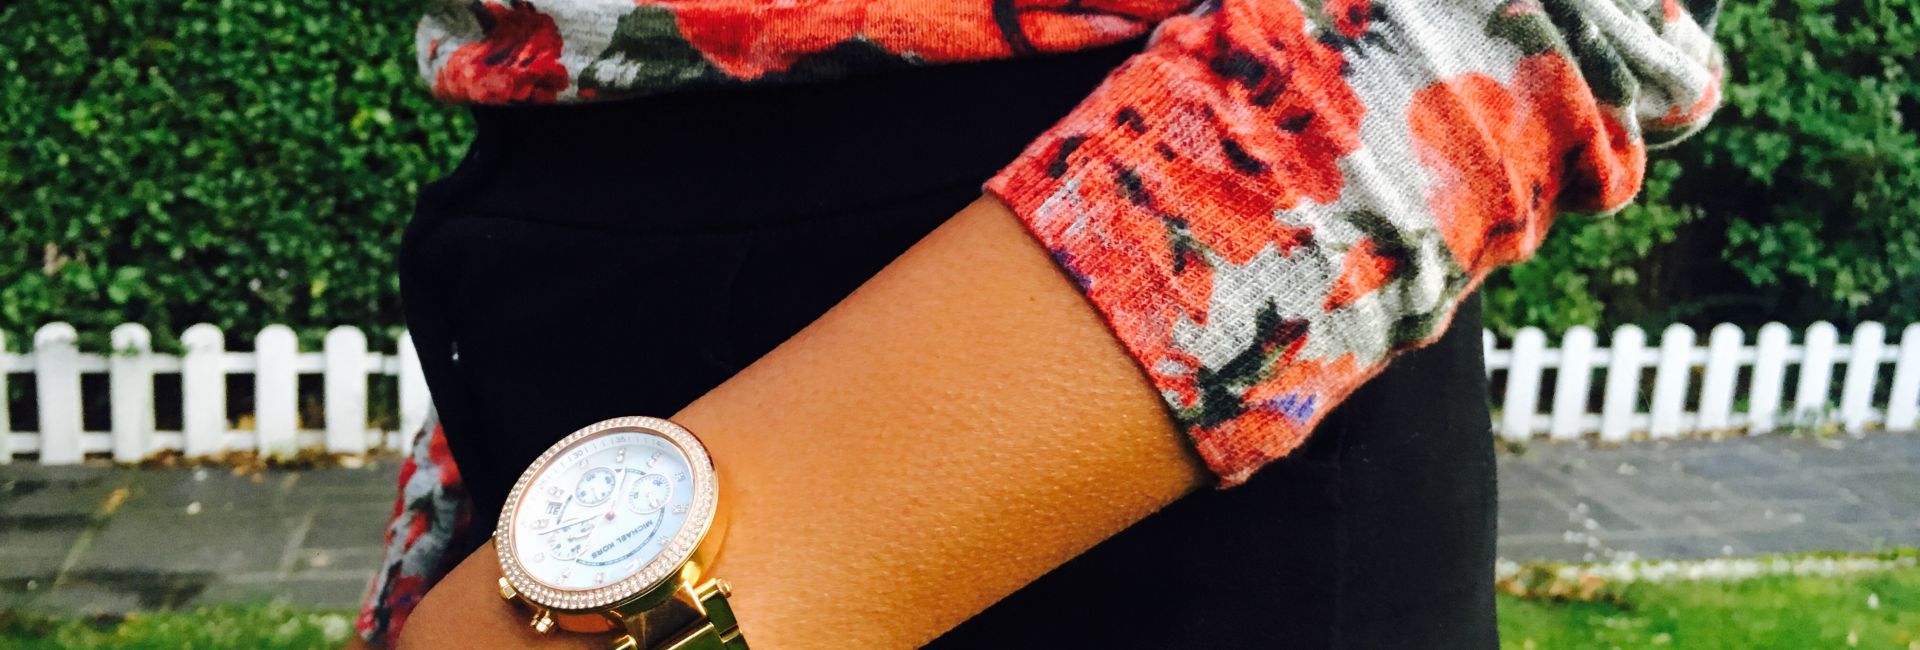 Floral knit with black buttoned skirt and michael kors watch